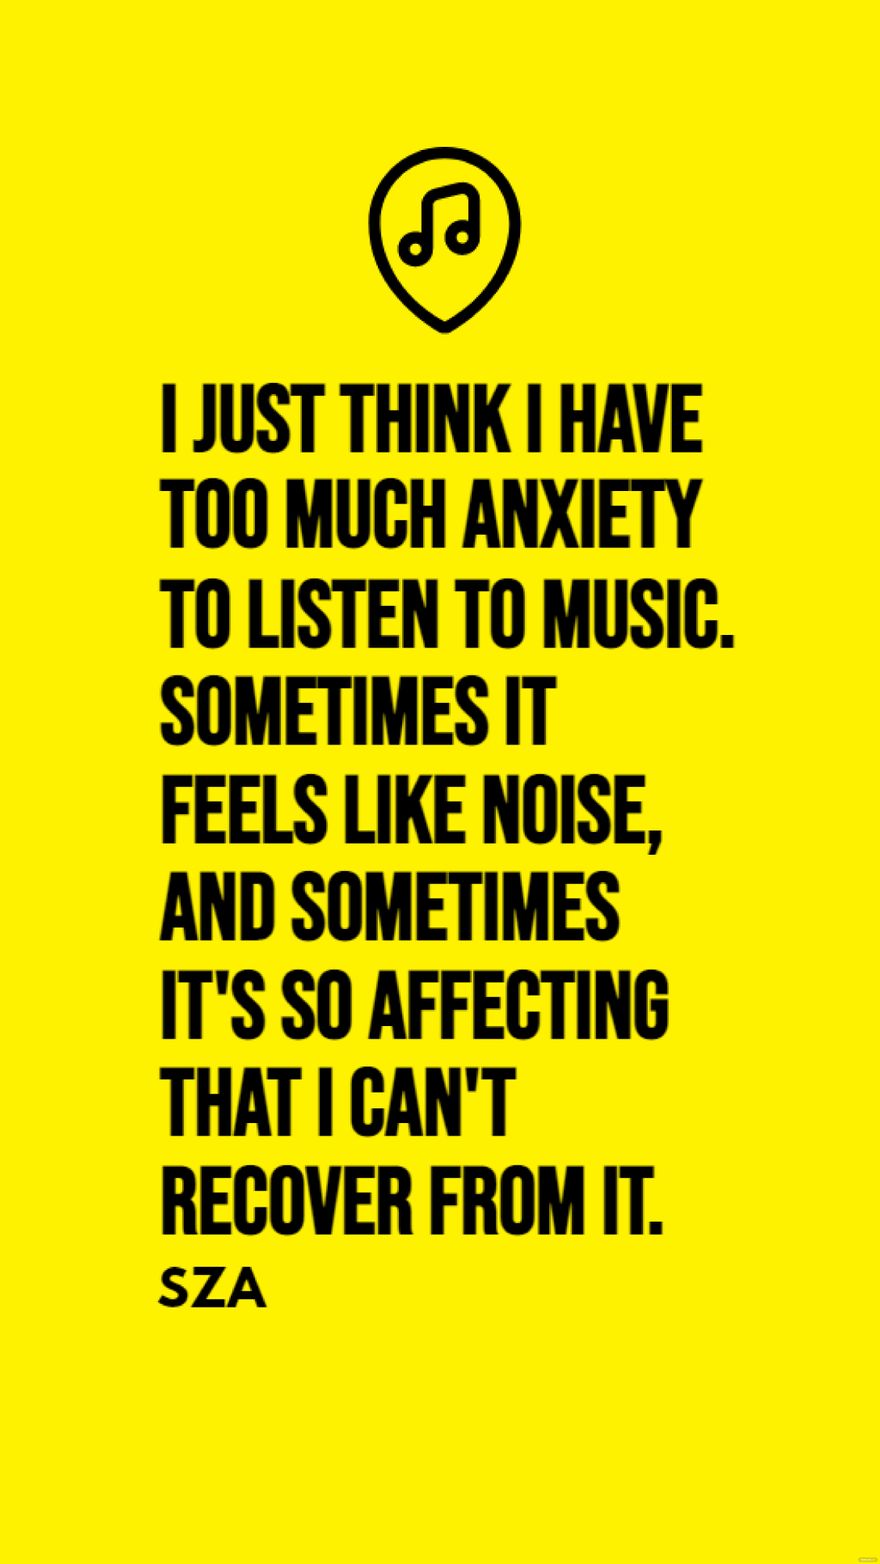 SZA - I just think I have too much anxiety to listen to music. Sometimes it feels like noise, and sometimes it's so affecting that I can't recover from it. in JPG